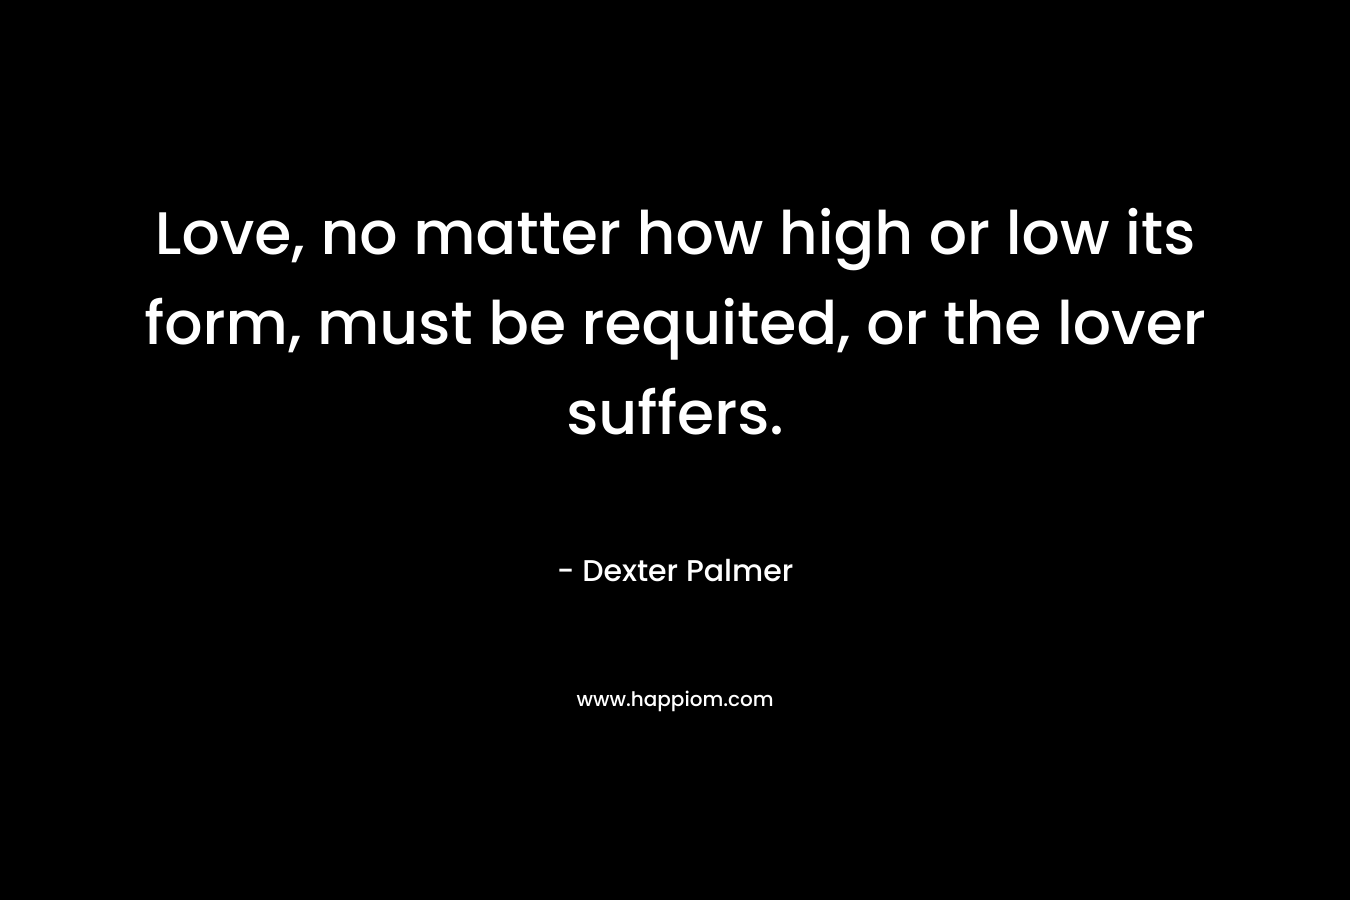 Love, no matter how high or low its form, must be requited, or the lover suffers.